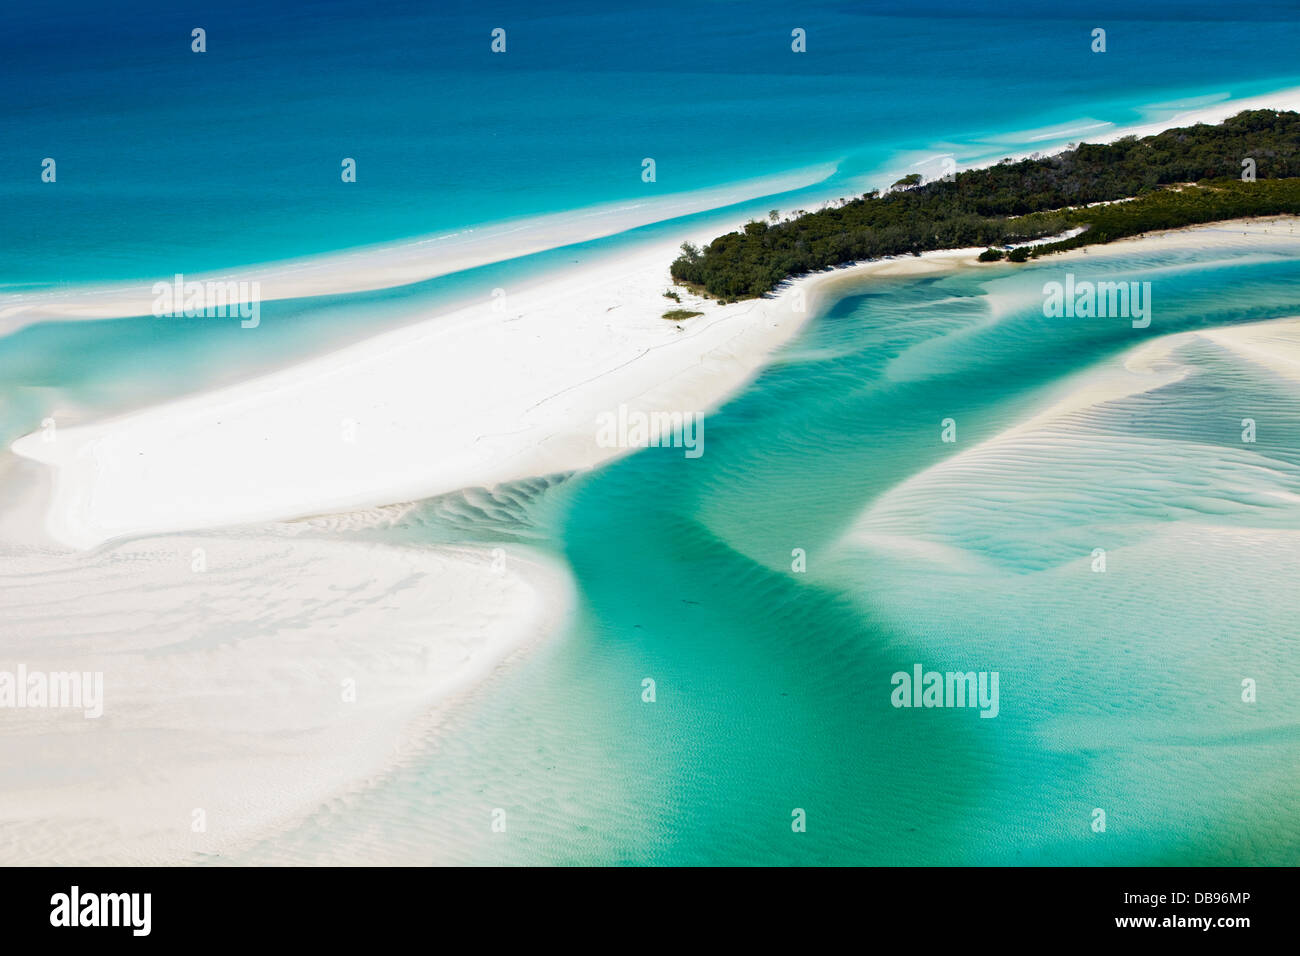 Aerial view of shifting sand banks and turquoise waters of Hill Inlet. Whitsunday Island, Whitsundays, Queensland, Australia Stock Photo